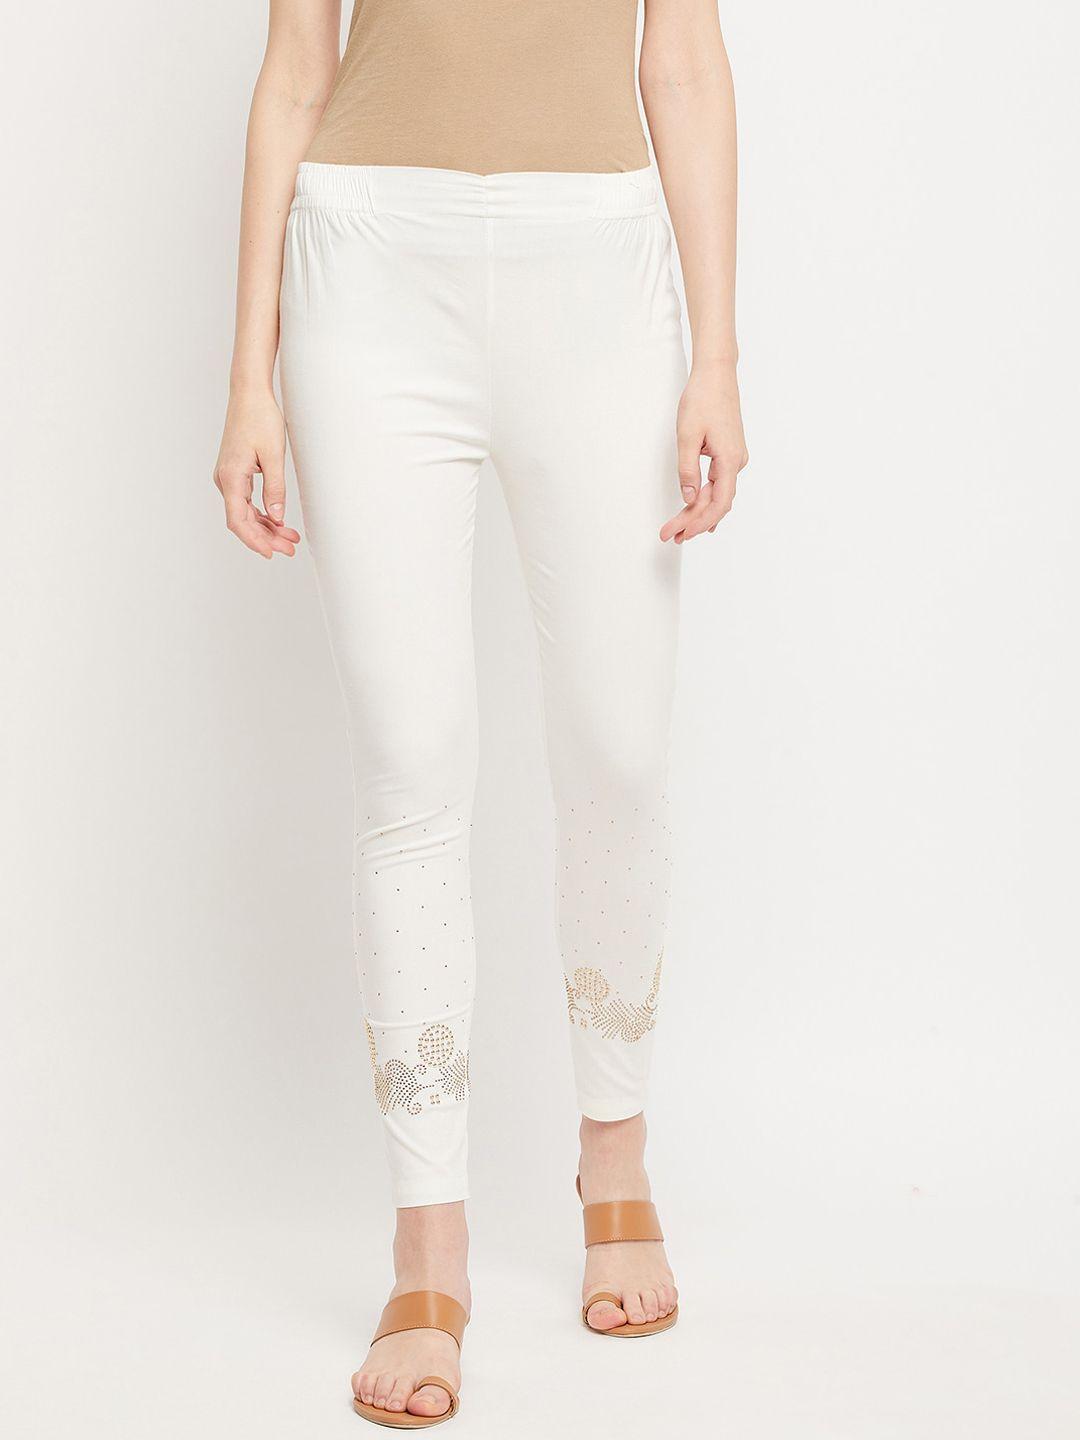 clora-creation-women-cream-coloured-floral-embroidered-smart-easy-wash-cotton-trousers